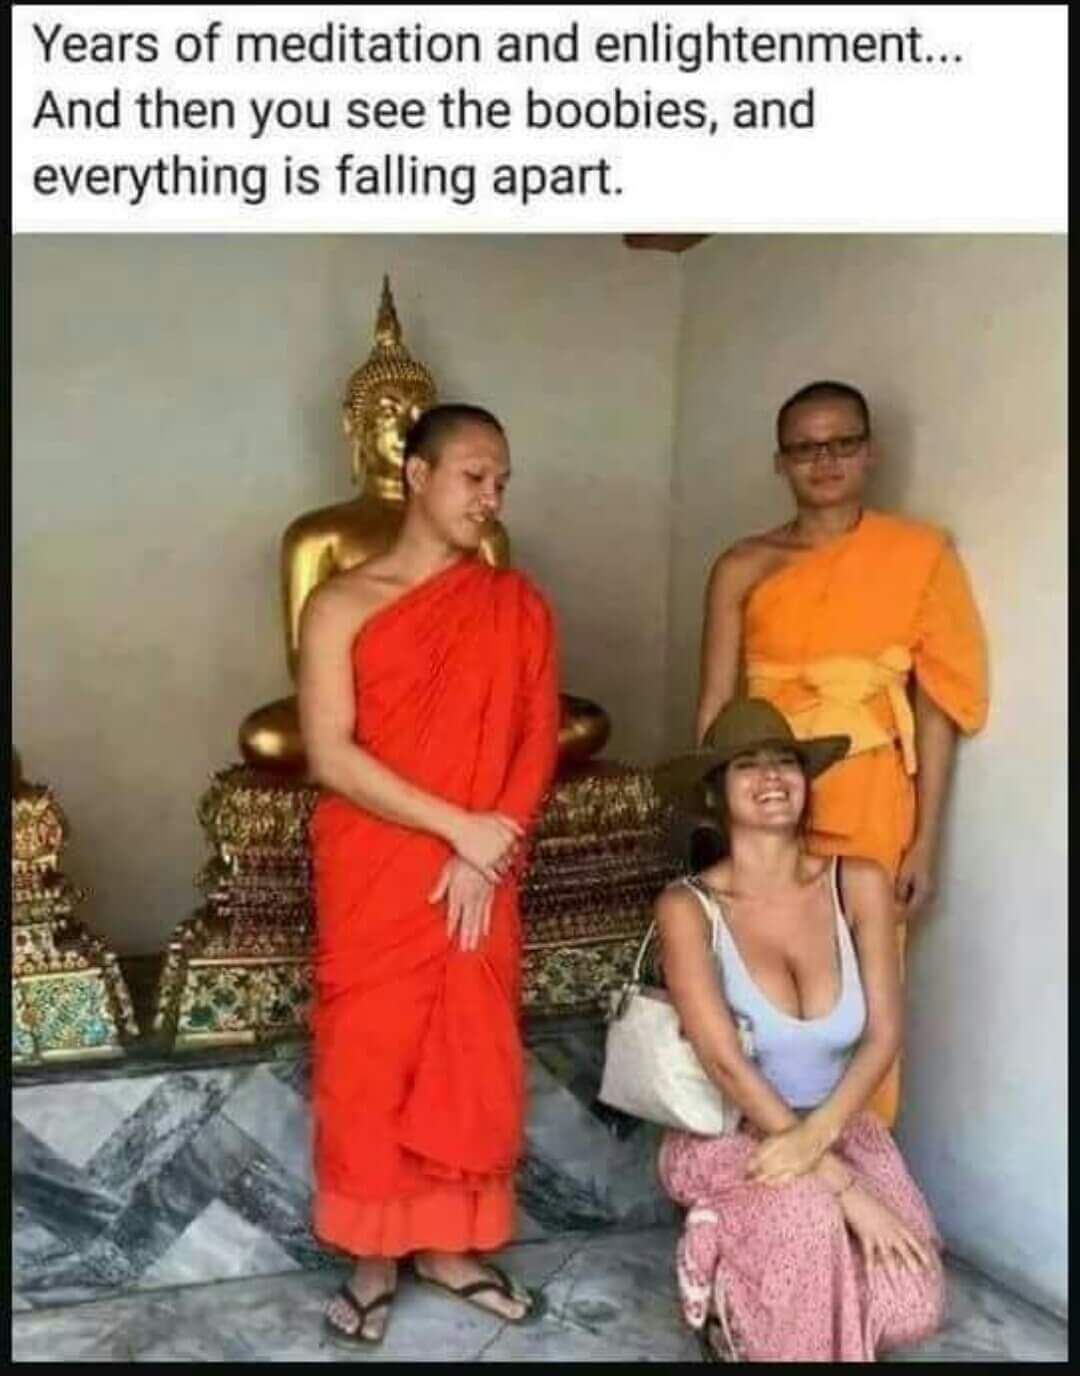 Enlightenment ain't got nothing on boobies!